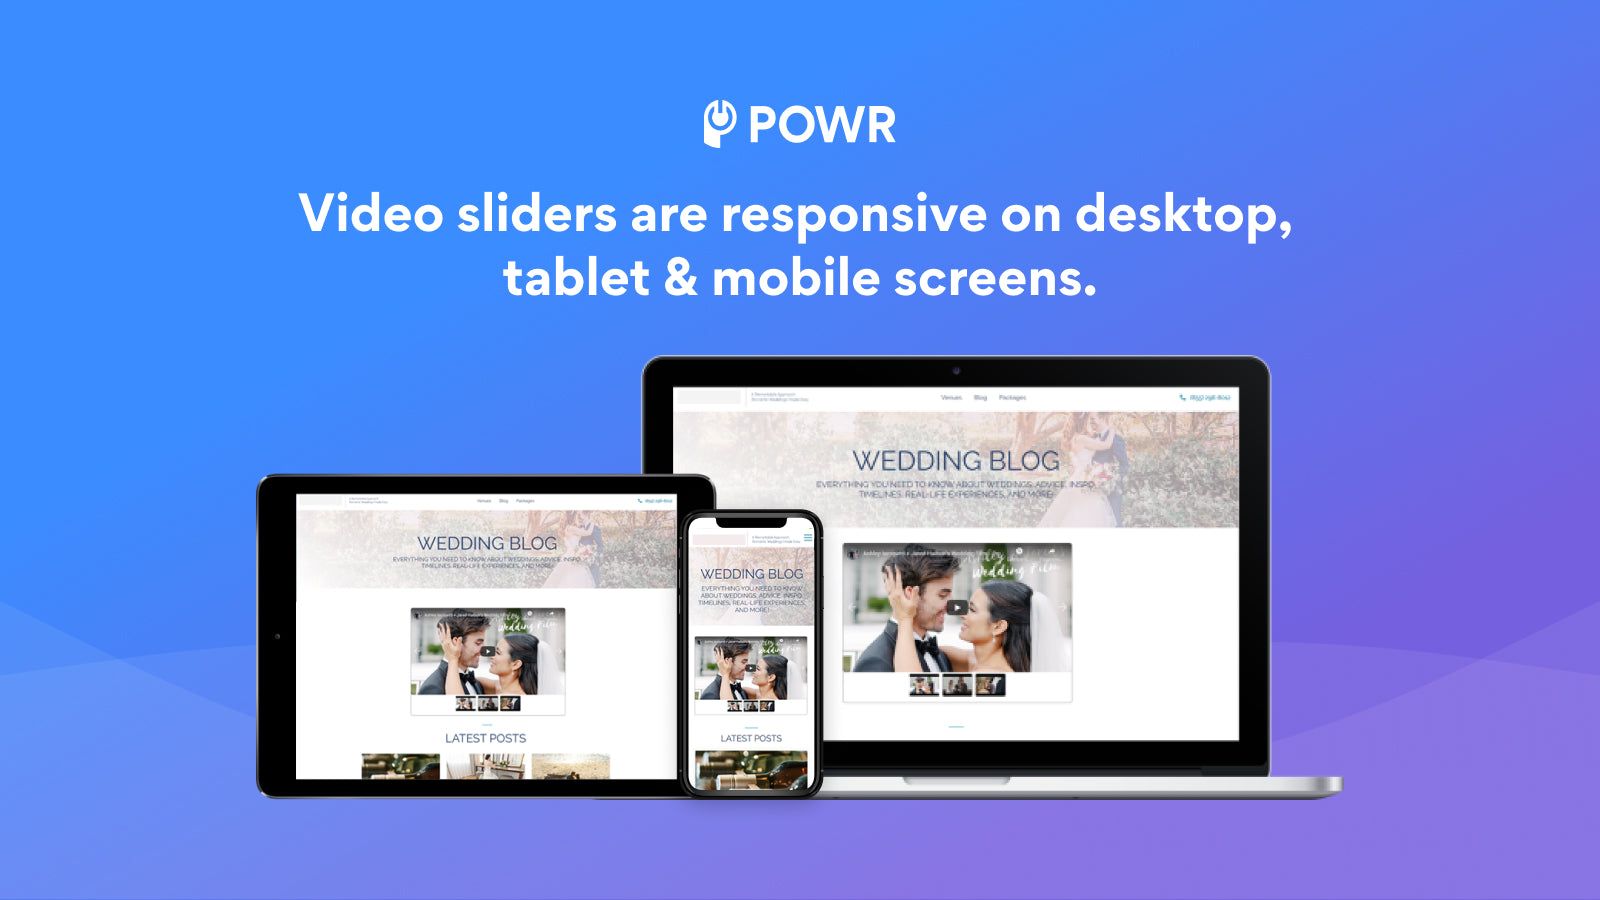 Video Sliders are responsive on desktop, tablet, and mobile.